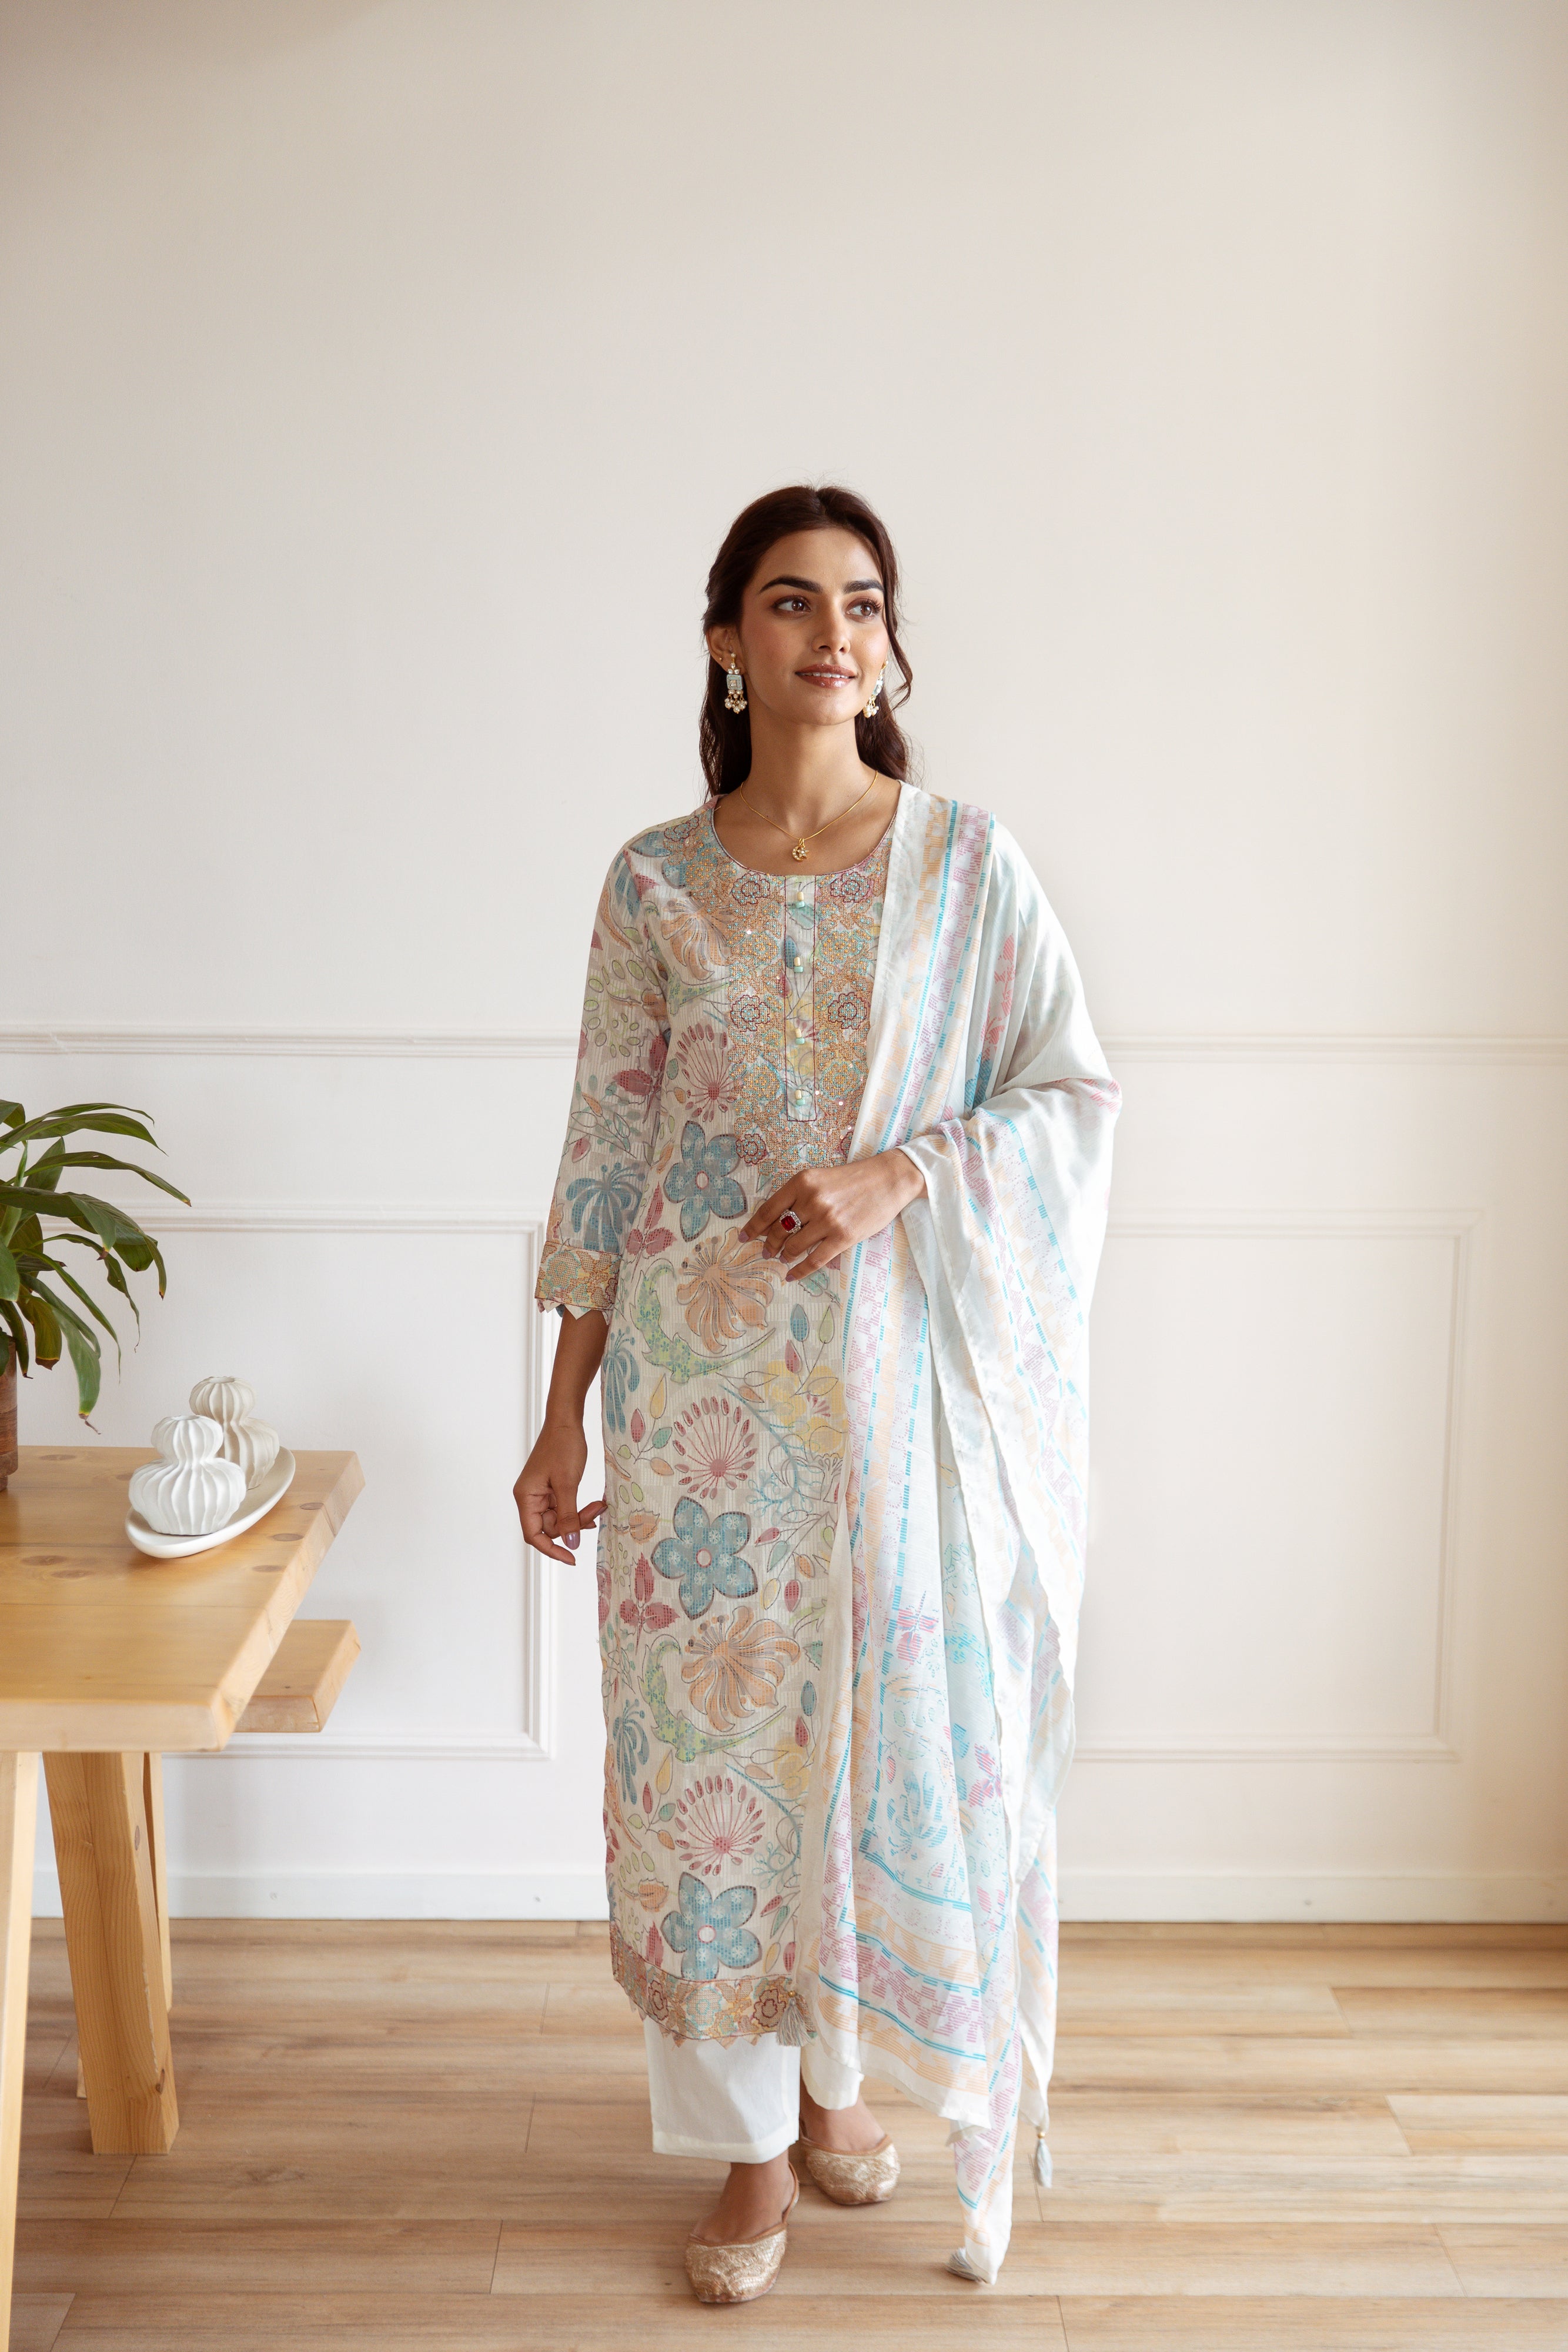 Cilory.com - New Styles that combine grace and simplicity! 💙💕  #BlueGownStyle# long Kurti#Ethnic wear#cilory Shop now@  https://www.cilory.com/486-party-wear?DPAIDS=106003 | Facebook